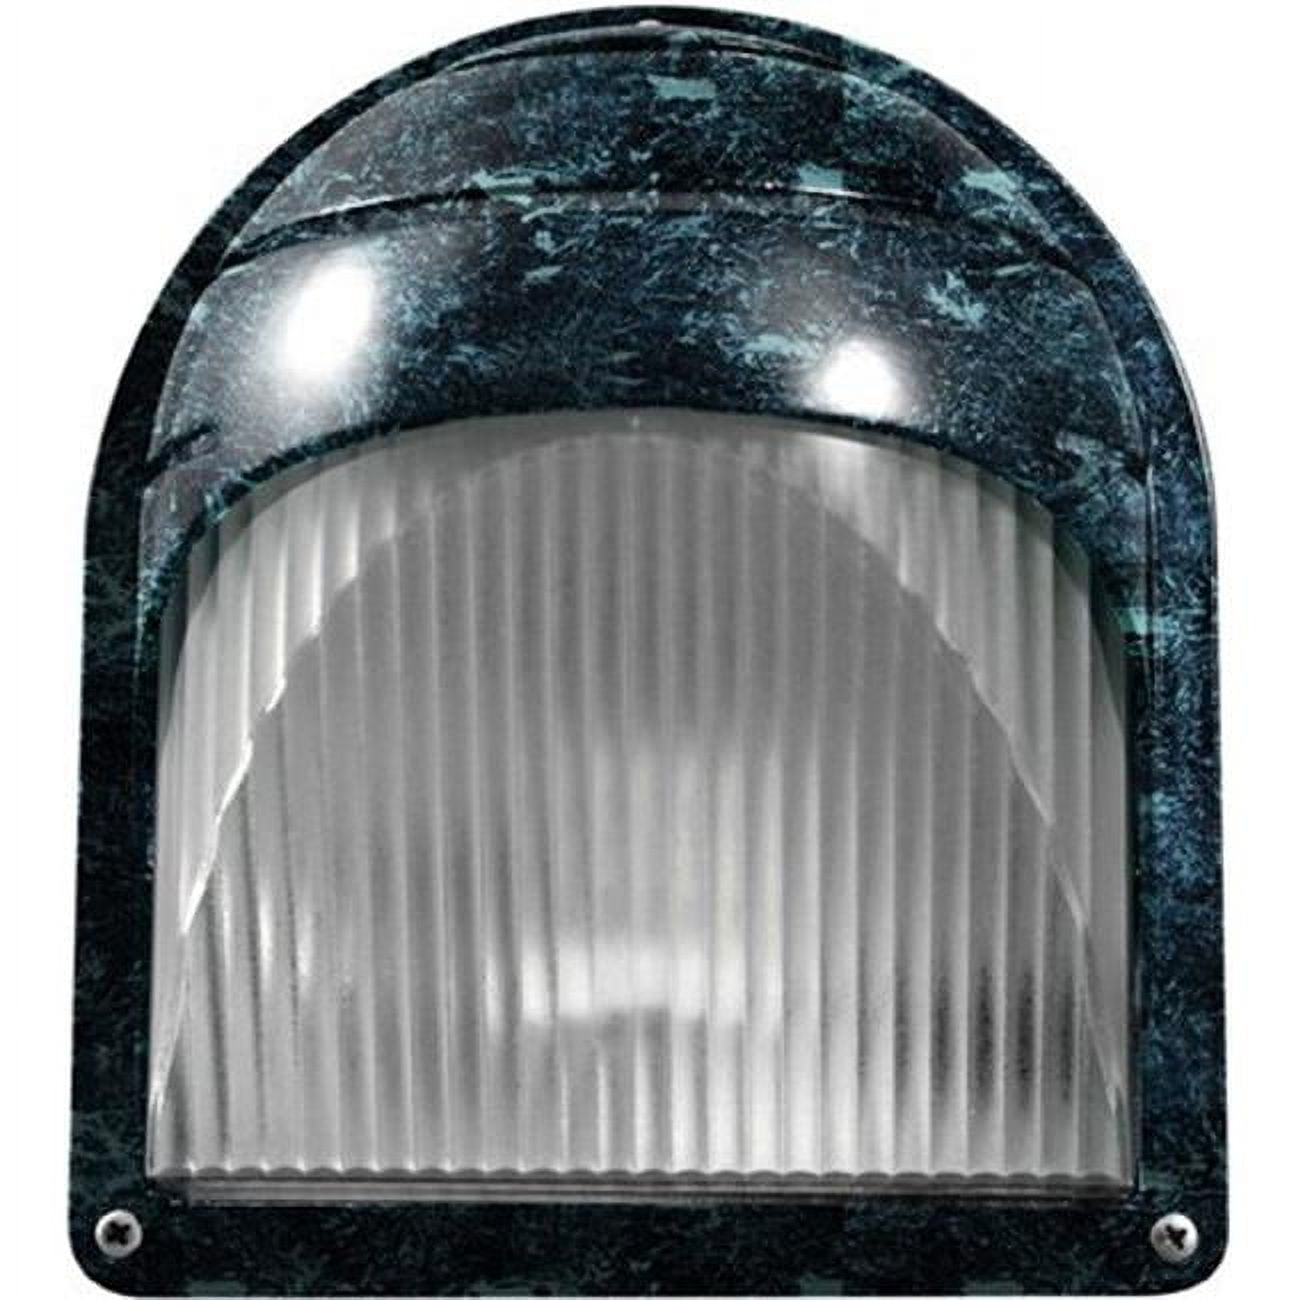 Picture of Dabmar Lighting W2970-VG 8 x 7.06 x 5 in. 120 V 60 watts Incandenscent Type Powder Coated Cast Aluminum Surface Mounted Wall Fixture Light, Verde Green